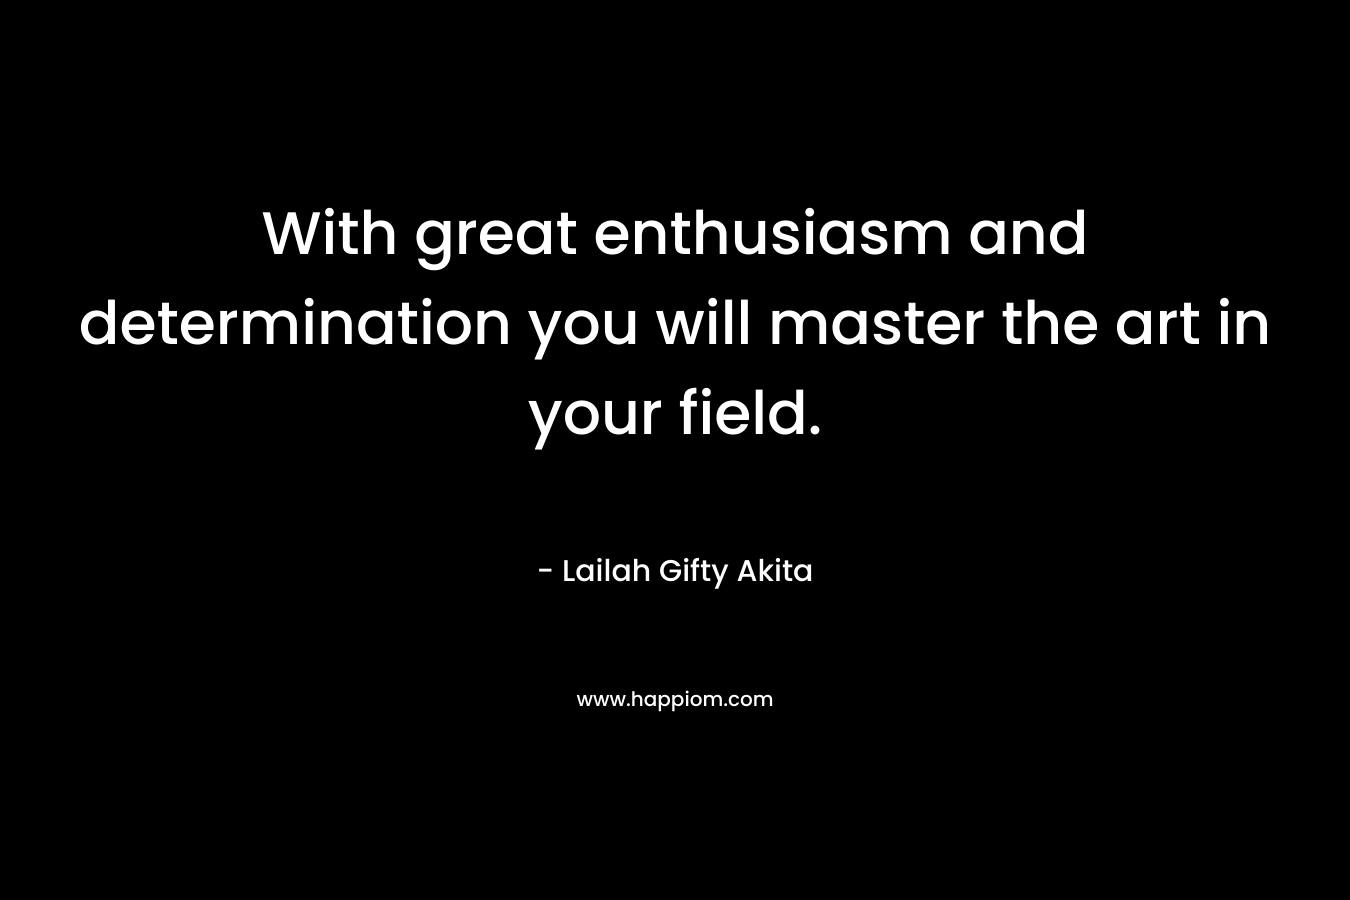 With great enthusiasm and determination you will master the art in your field.